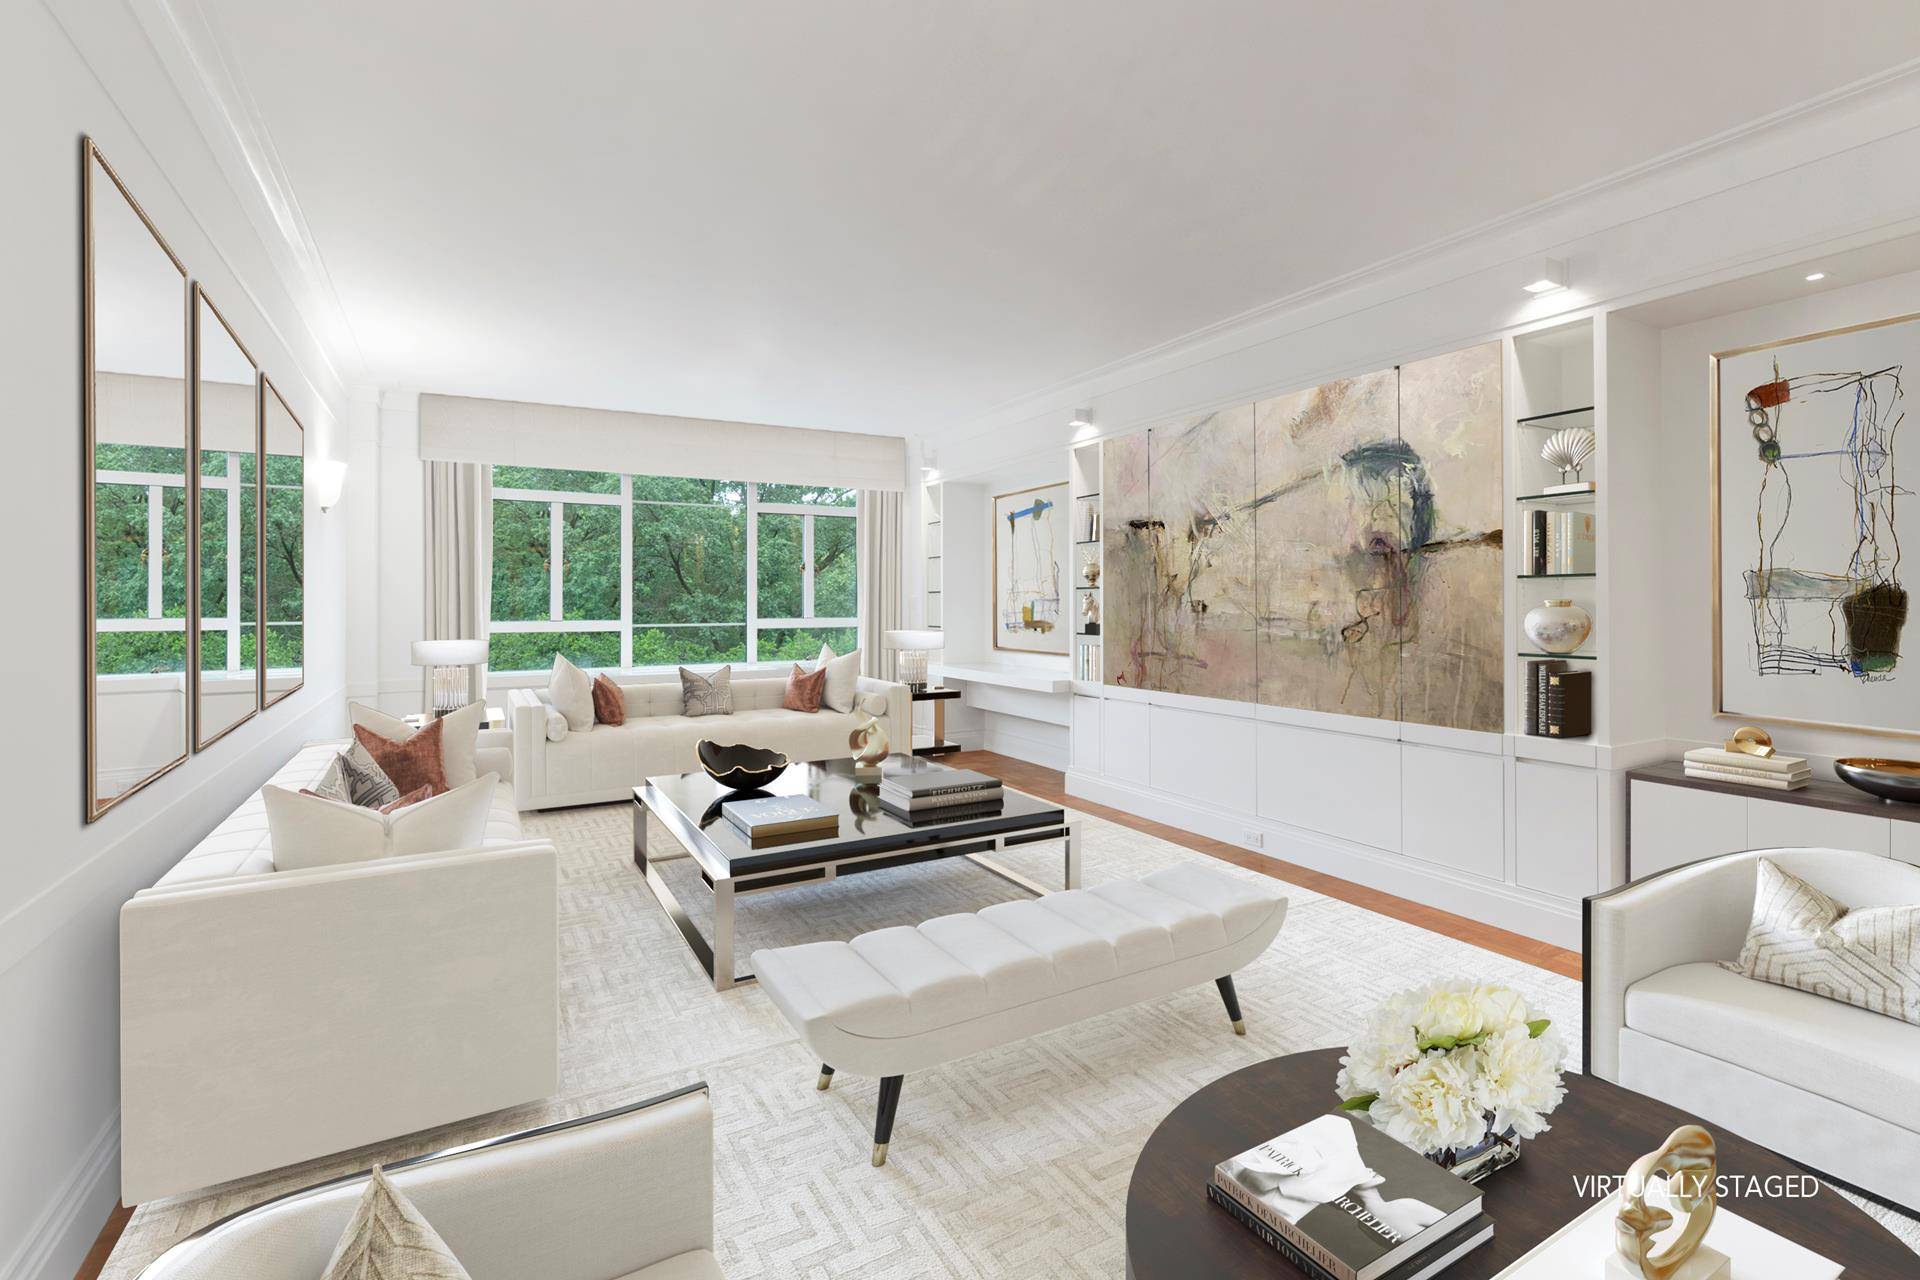 NEW OFFERING in one of the most distinguished full service cooperatives on Fifth Avenue.